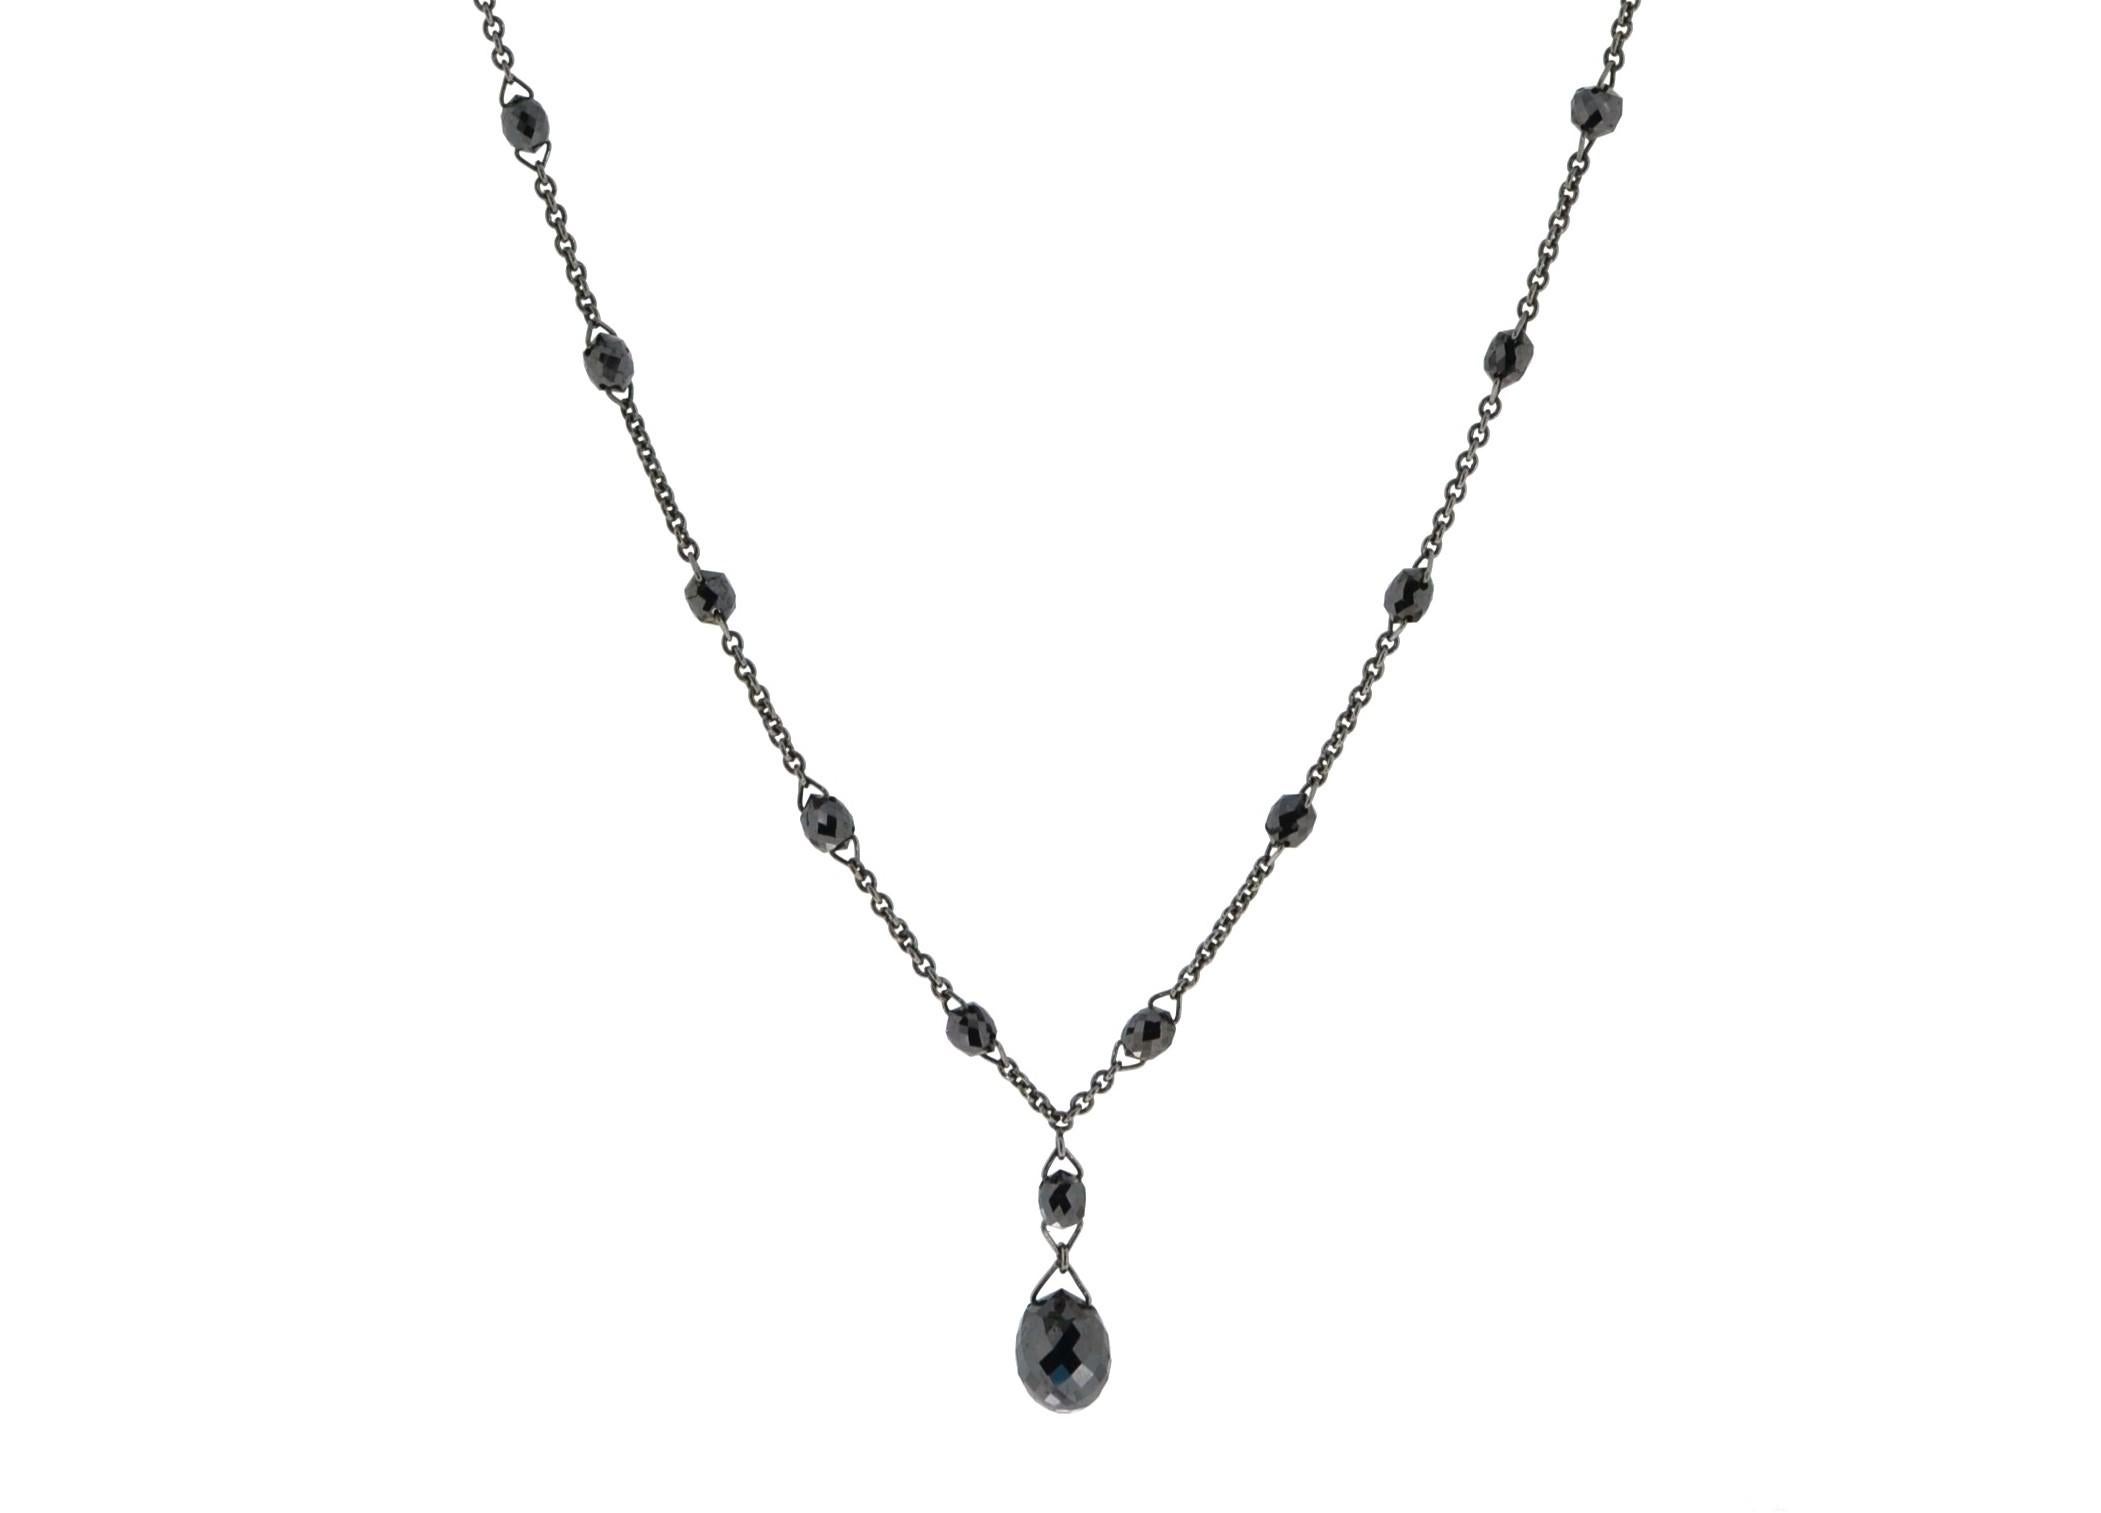 JR 3.52 Carat Black Diamond Briolette  Dangling Necklace 18 Karat Gold

This contemporary piece of necklace is made with 3.52 carats Black diamond Briolette and it eludes femininity & grace.
Necklace has extra gold ring near the clasp to adjust the